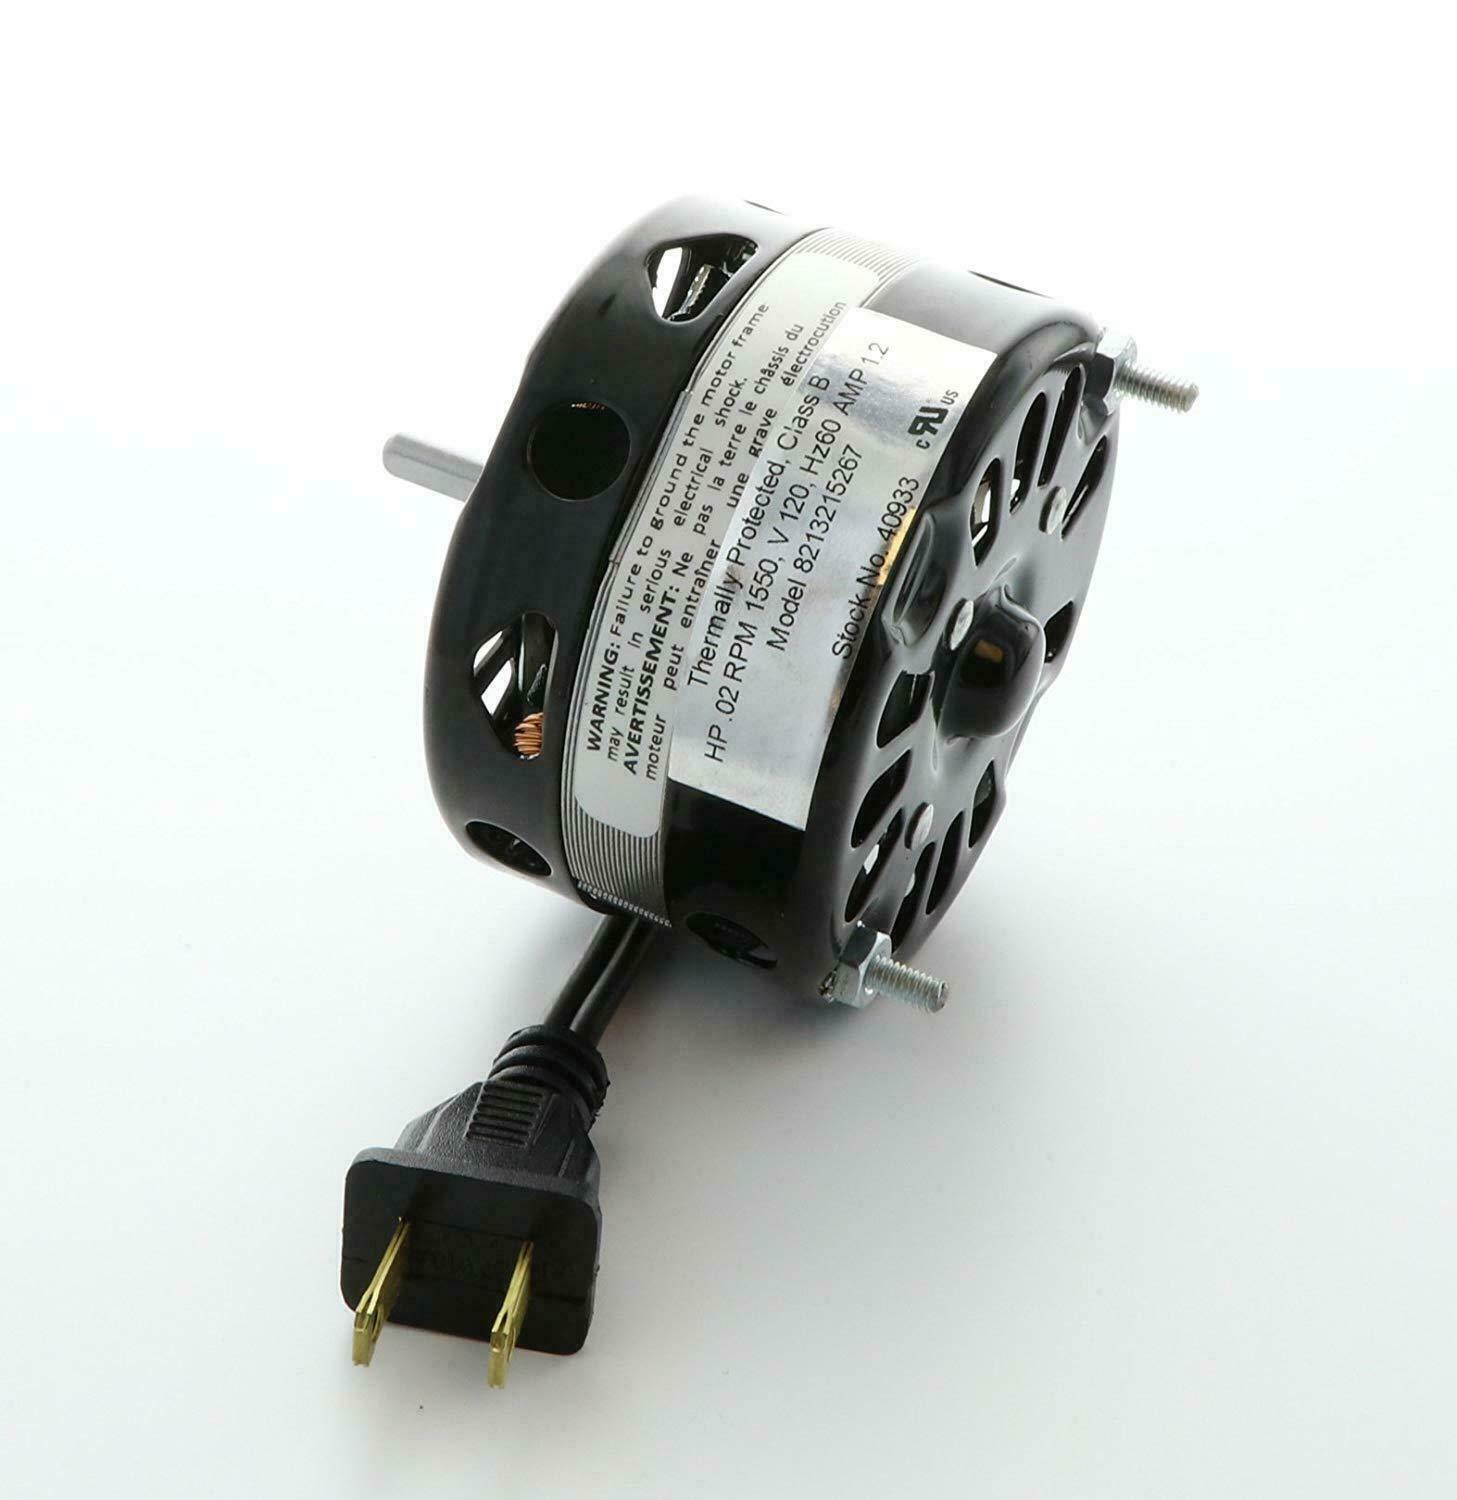 33 Ventilation Fan Motor 120v For Nutone Broan Bathroom Kitchen Exhaust Blower with regard to sizing 1457 X 1500